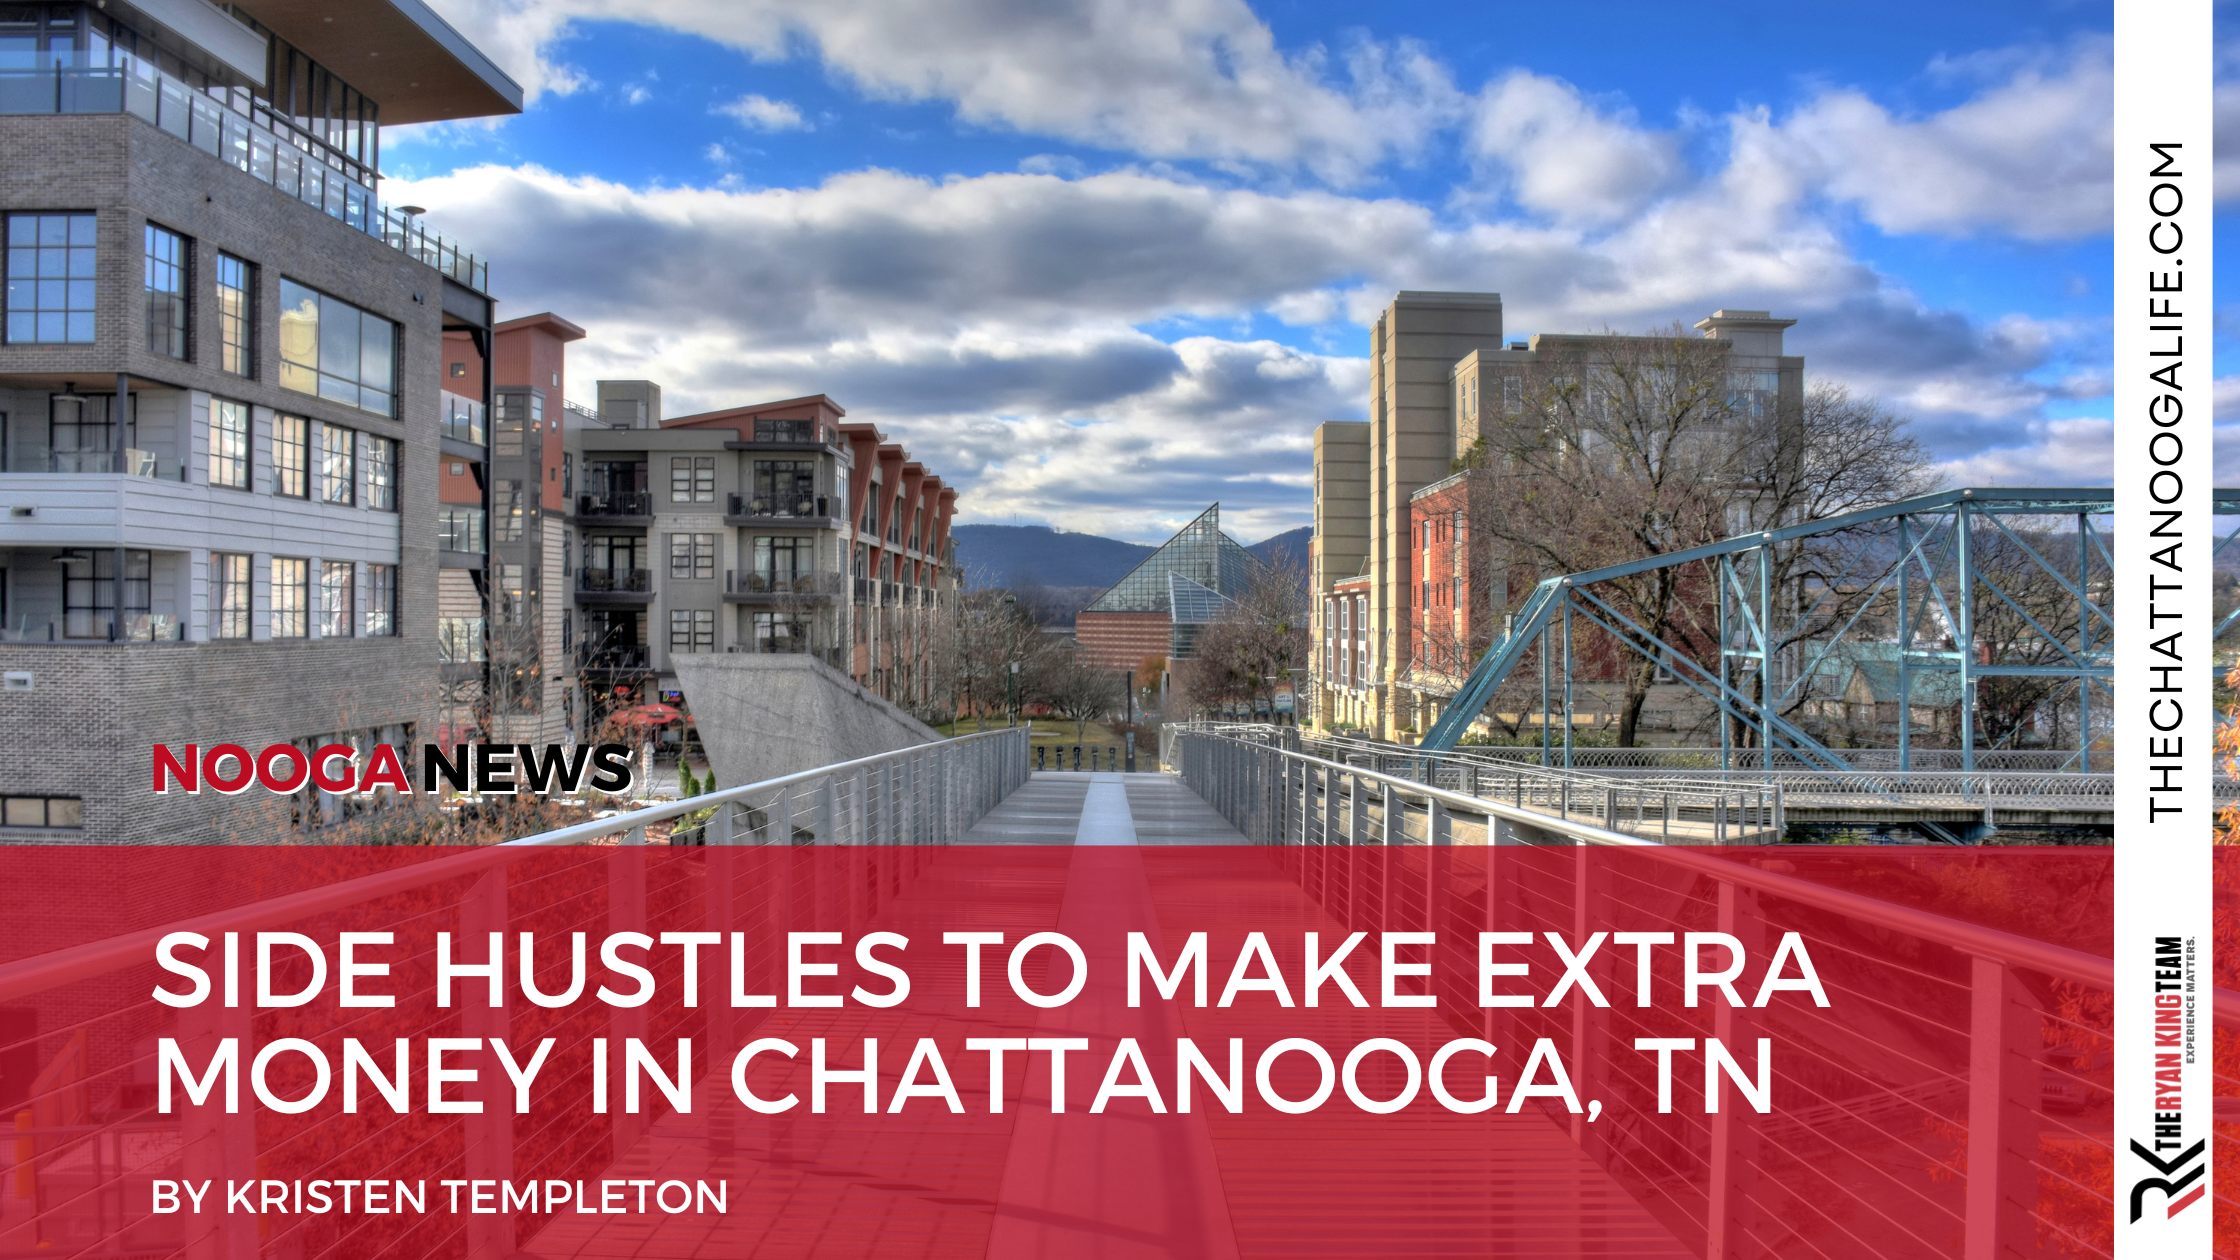 Side hustles to make extra money in Chattanooga, TN